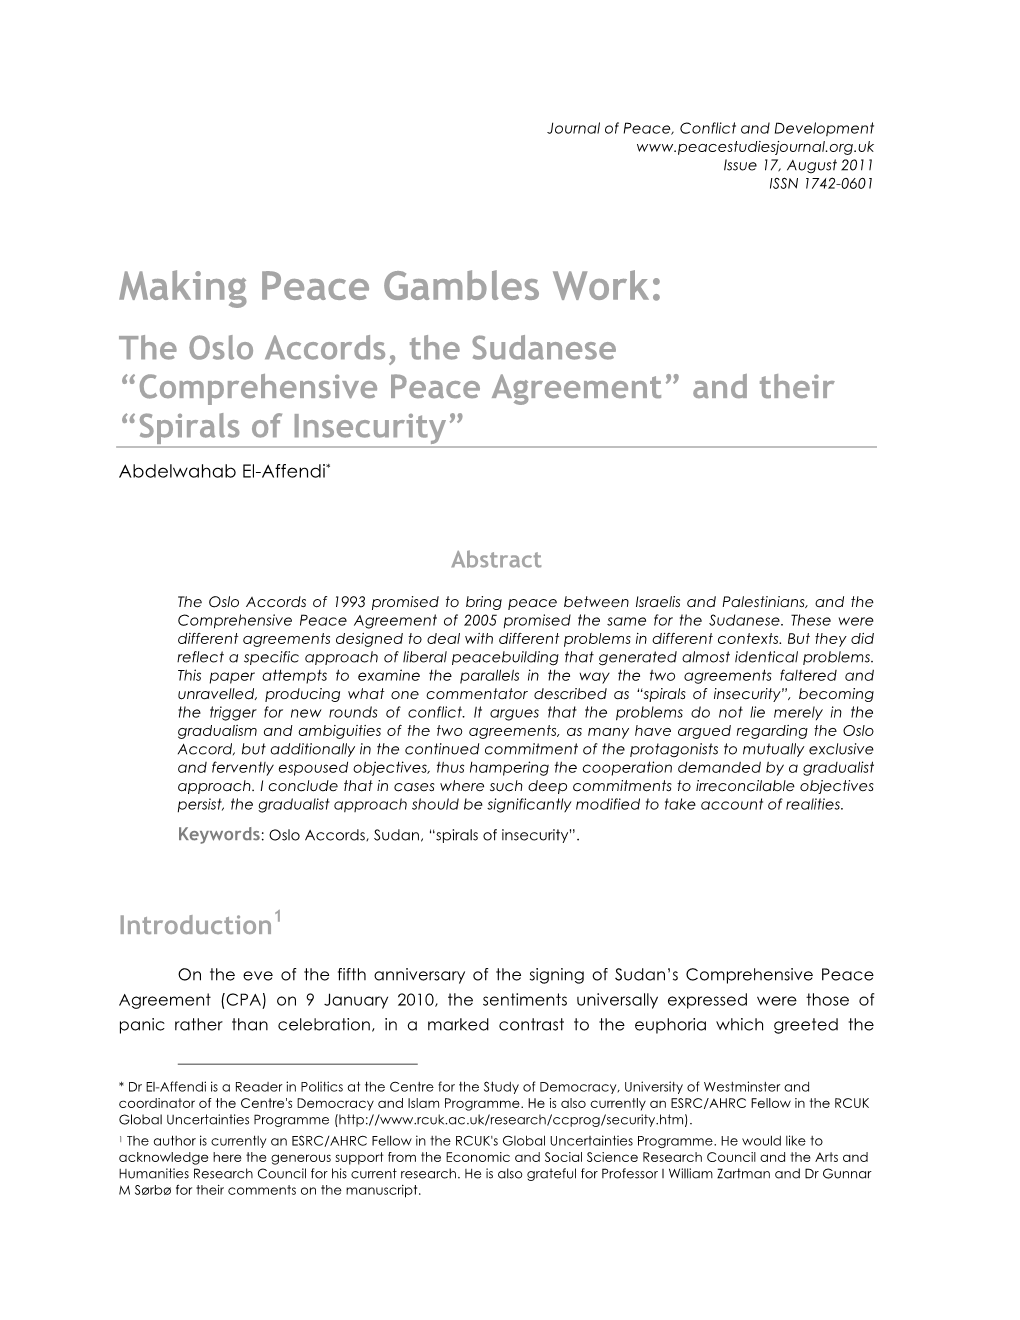 The Oslo Accords, the Sudanese “Comprehensive Peace Agreement” and Their “Spirals of Insecurity”